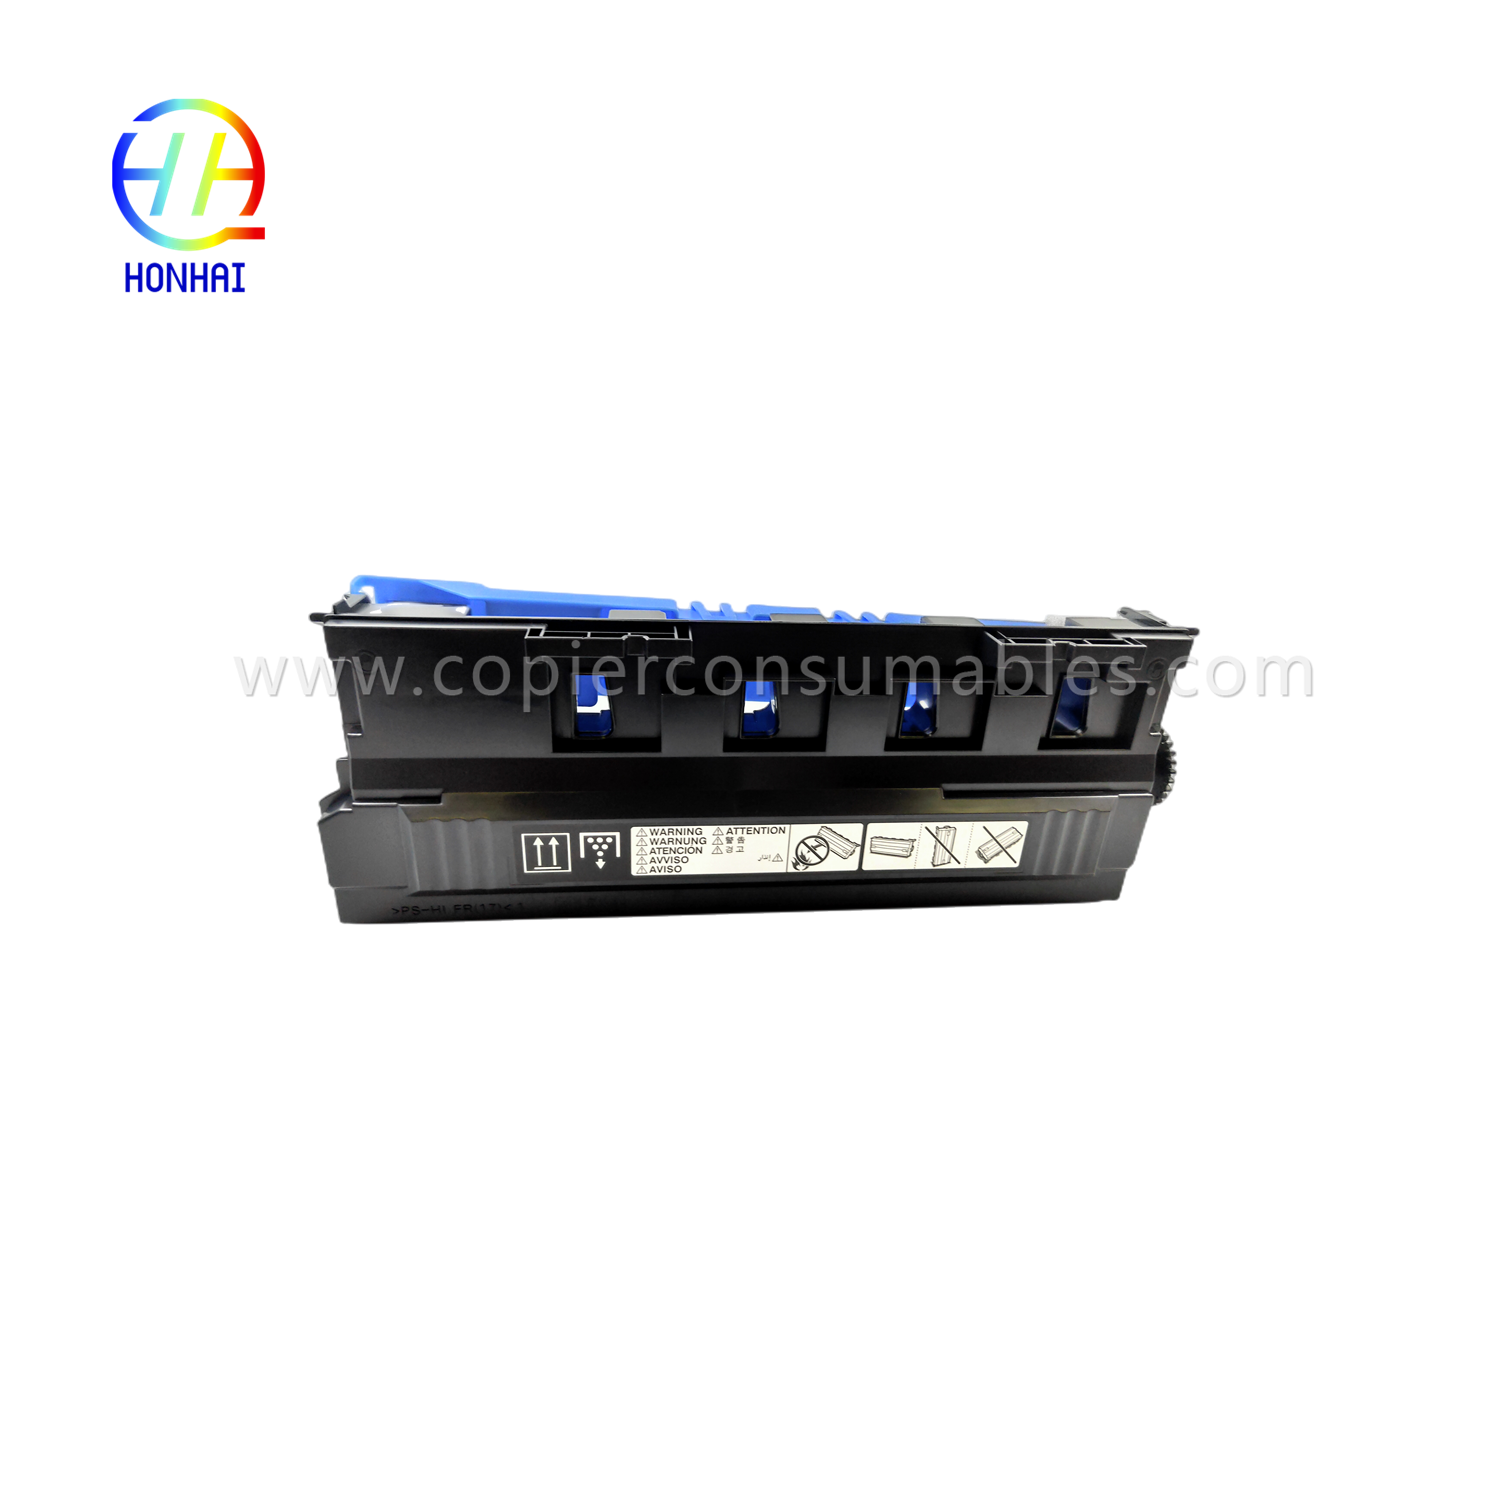 https://c585.goodo.net/waste-toner-container-for-konica-minolta-bizhub-c226-c256-c266-c227-c287-c367-c7333-c7226-c7528-wx-105-a8j-jwy1 toner-box-product/